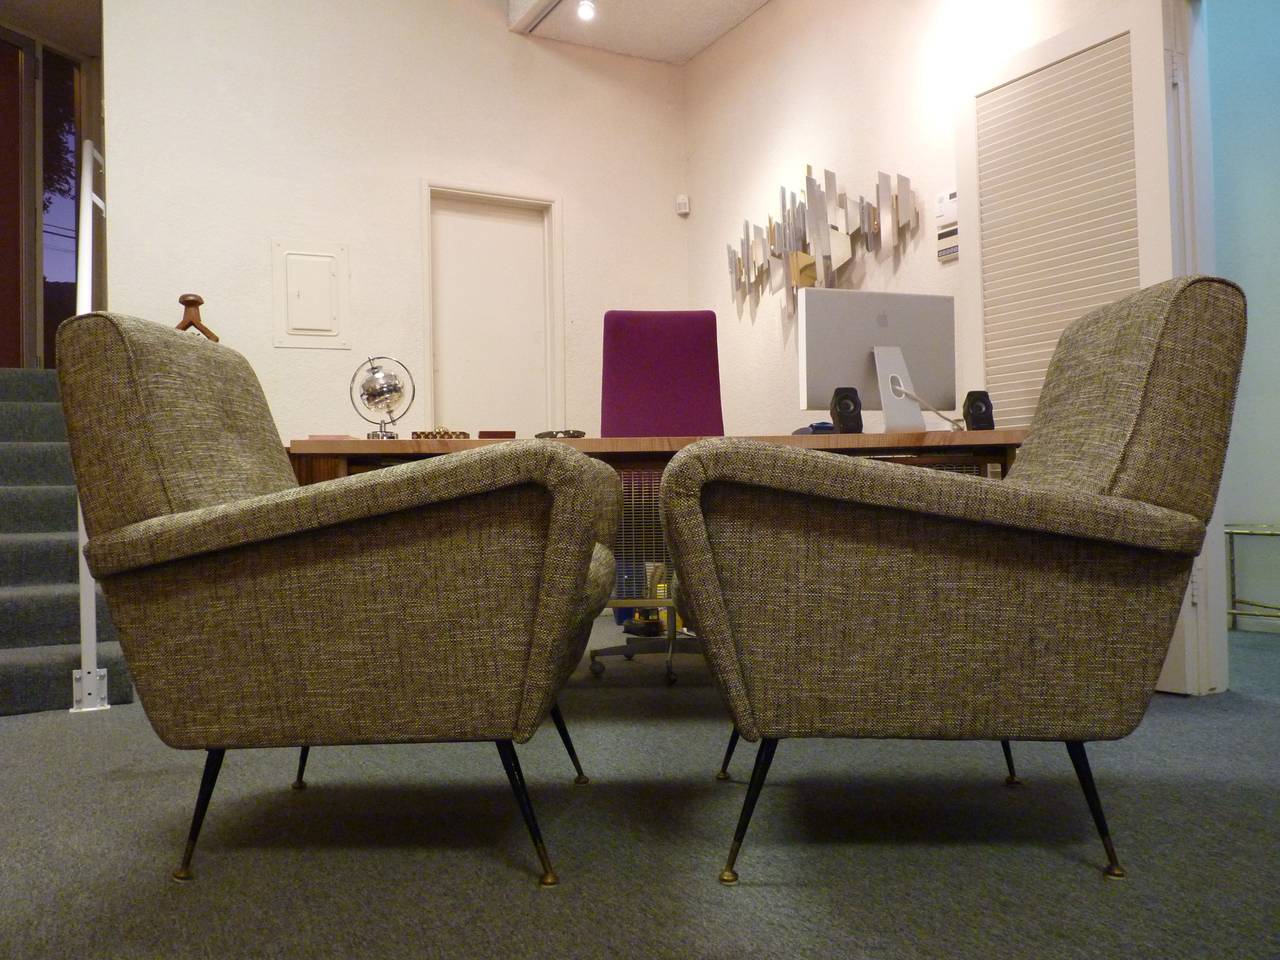 Pair of large-scale modern Italian chairs suitable for those who are 6 ft. + tall. Custom-made pair of chairs very unlike most Italian 1960s armchairs as they are very large-scale. These would work very well with contemporary scale furniture or in